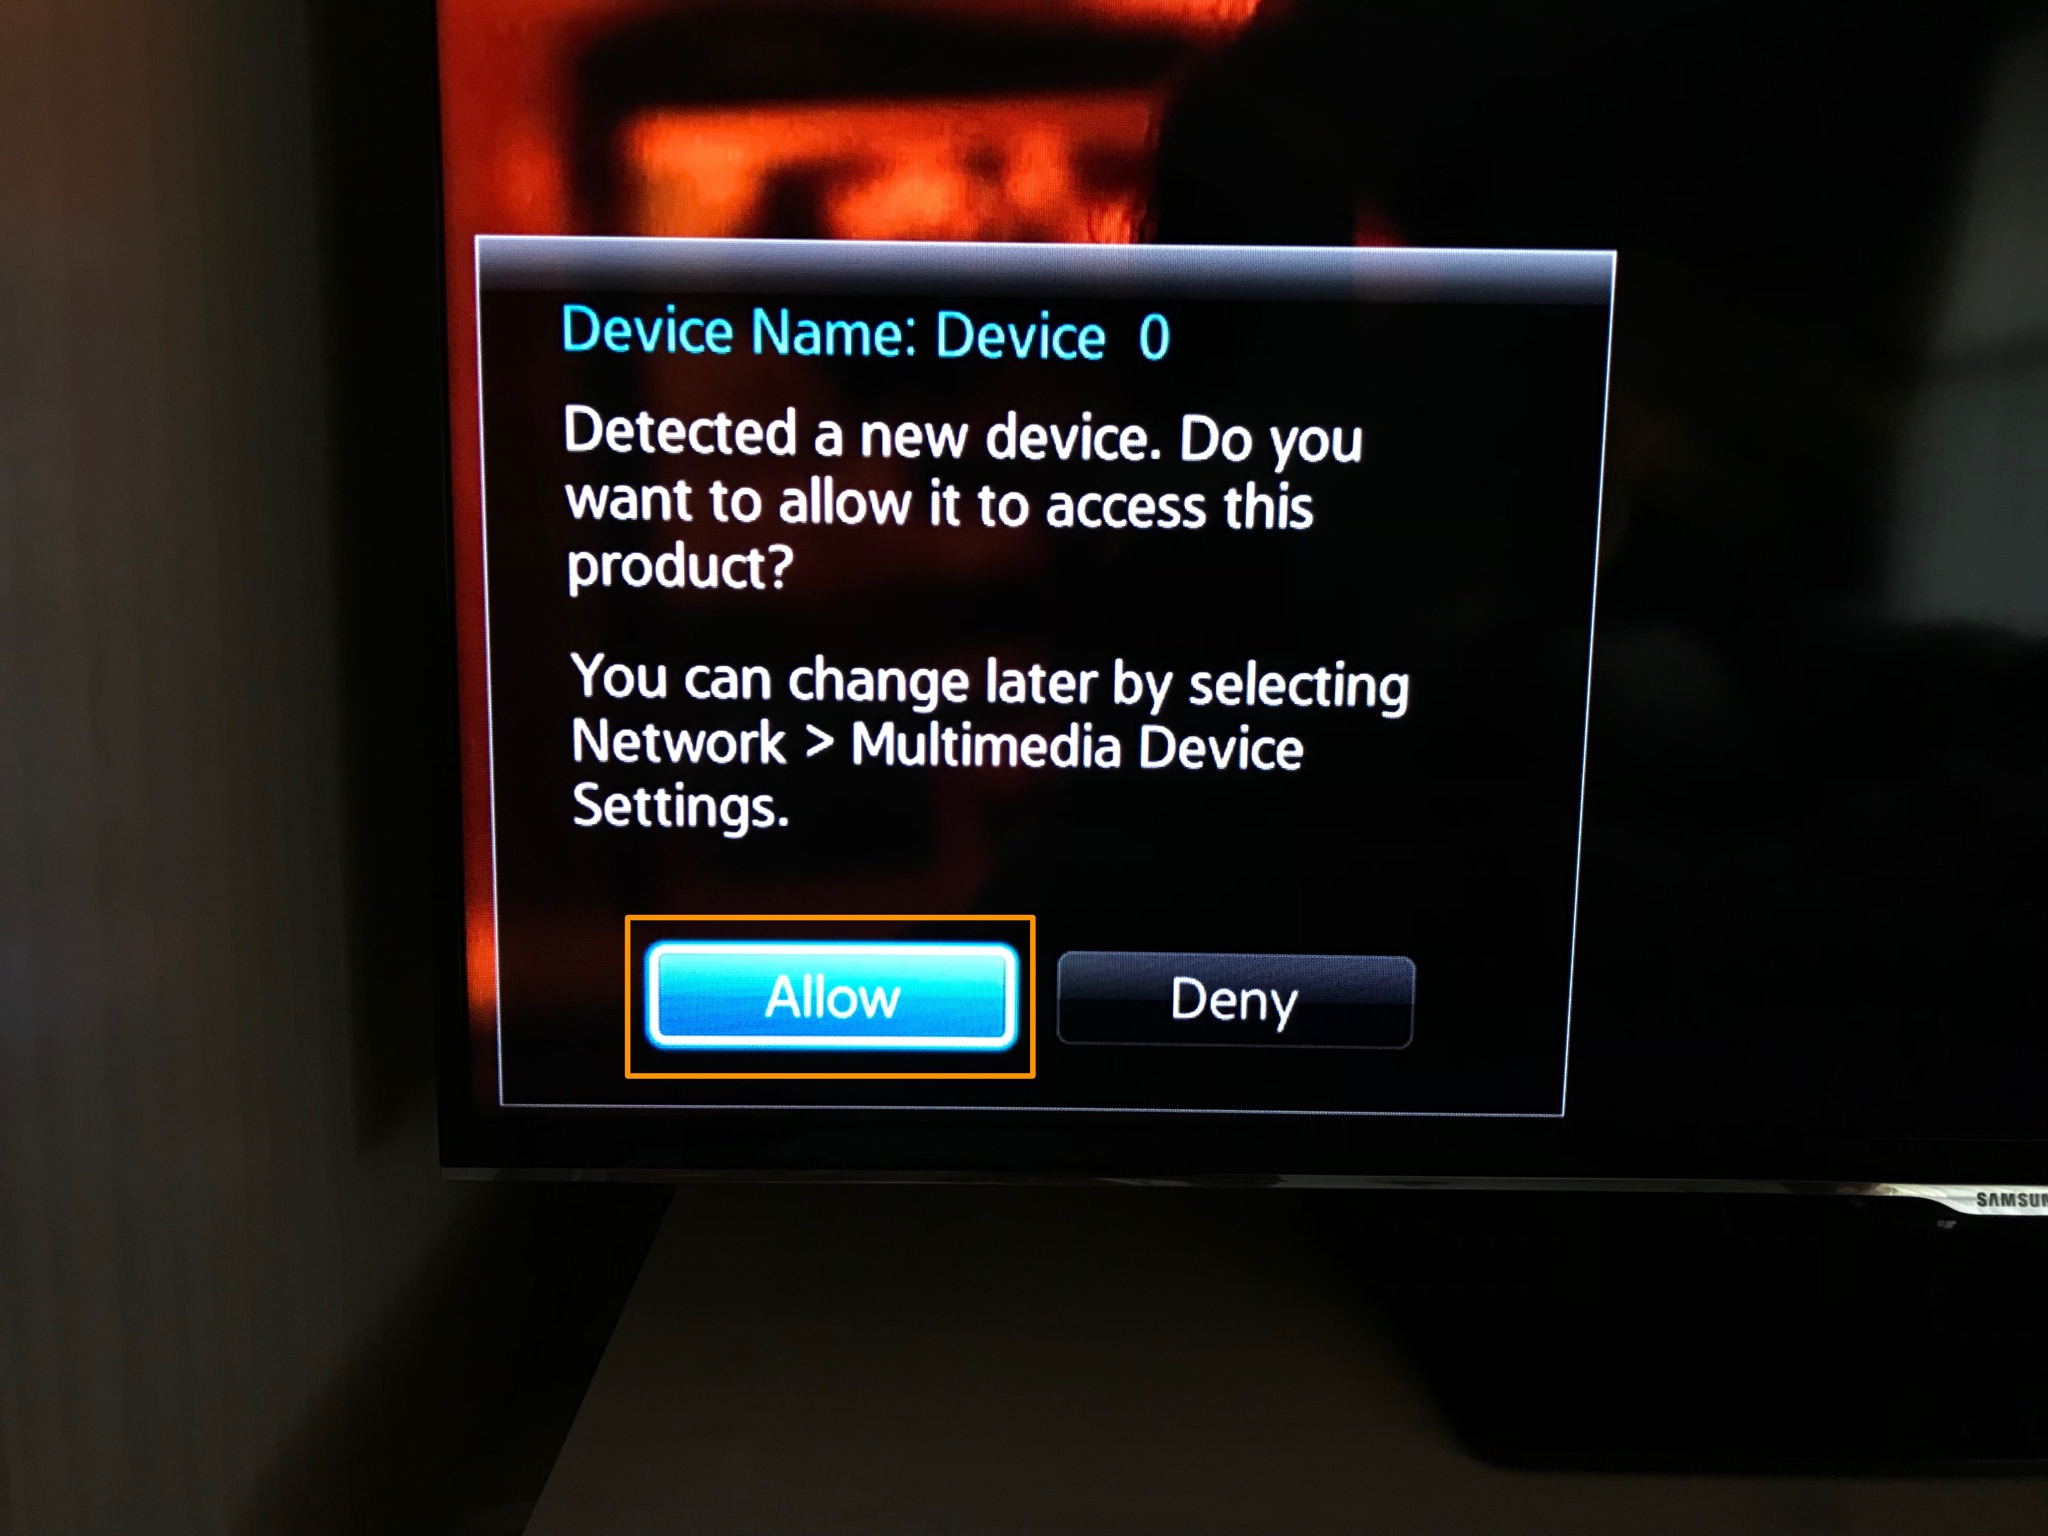 Mirror Your Iphone Or Ipad On A Smart Tv, How To Mirror Image From Ipad Samsung Smart Tv